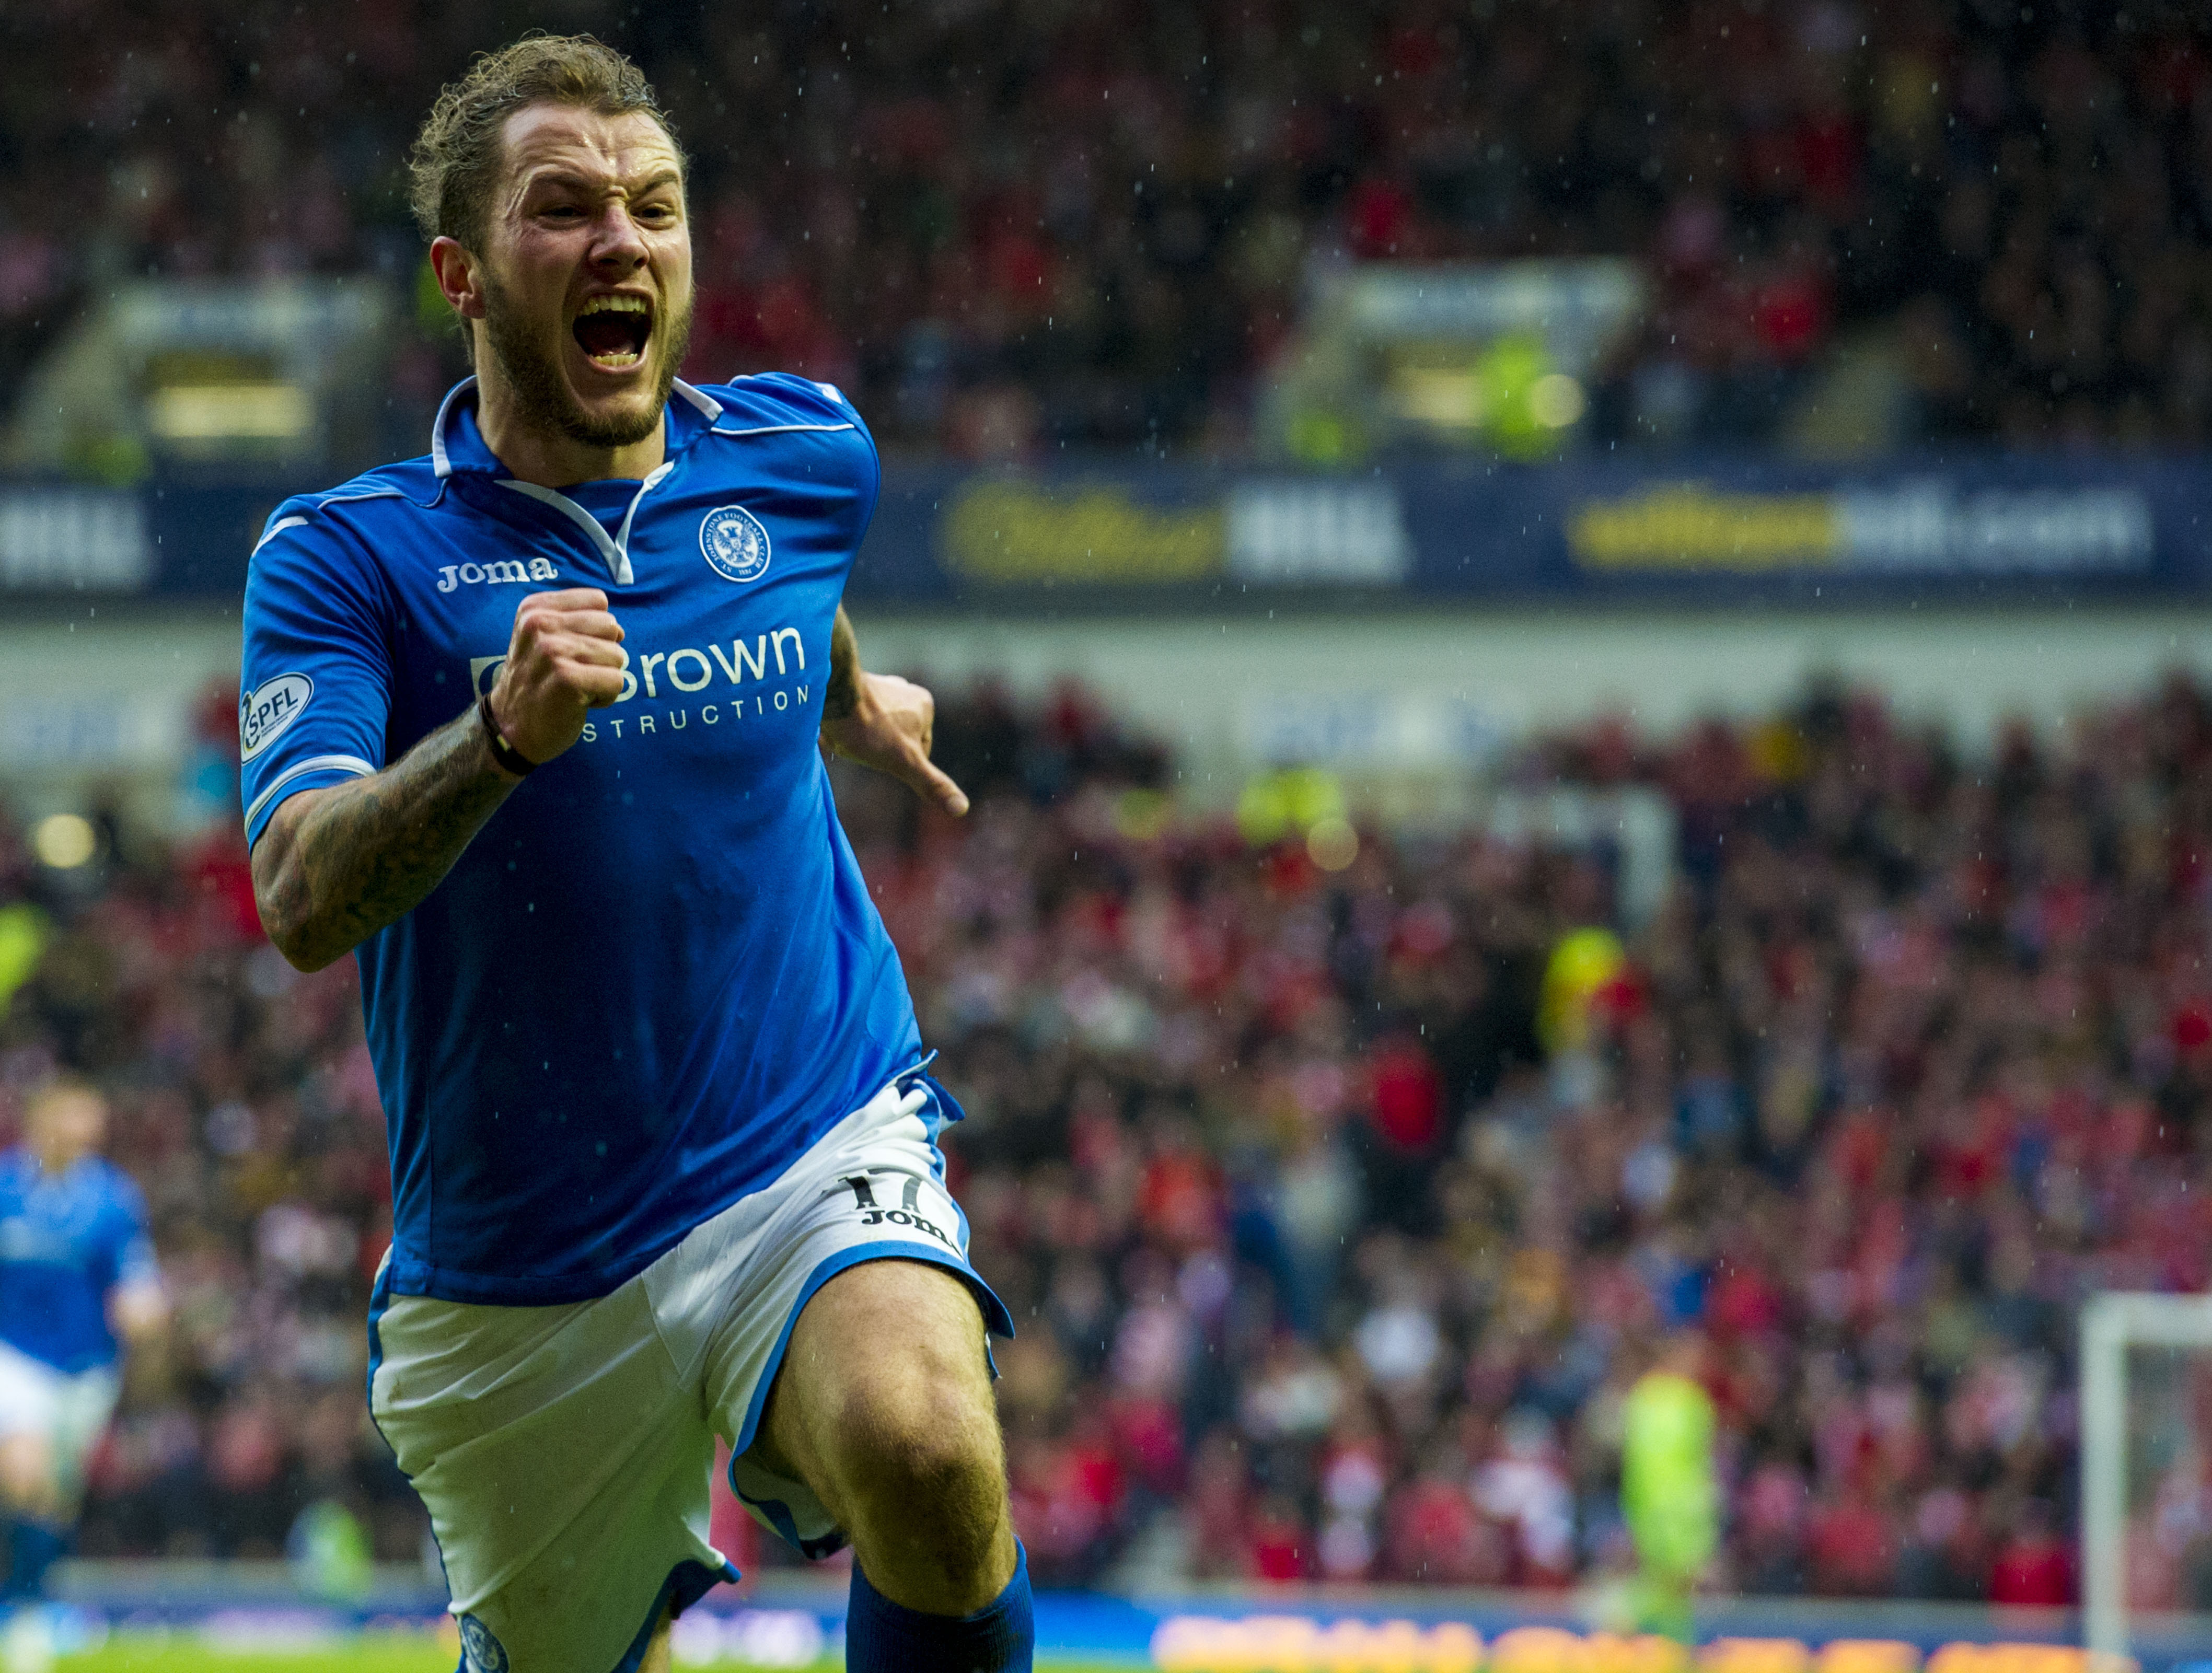 Stevie May celebrates scoring against Aberdeen in the 2014 Scottish Cup semi-finals.